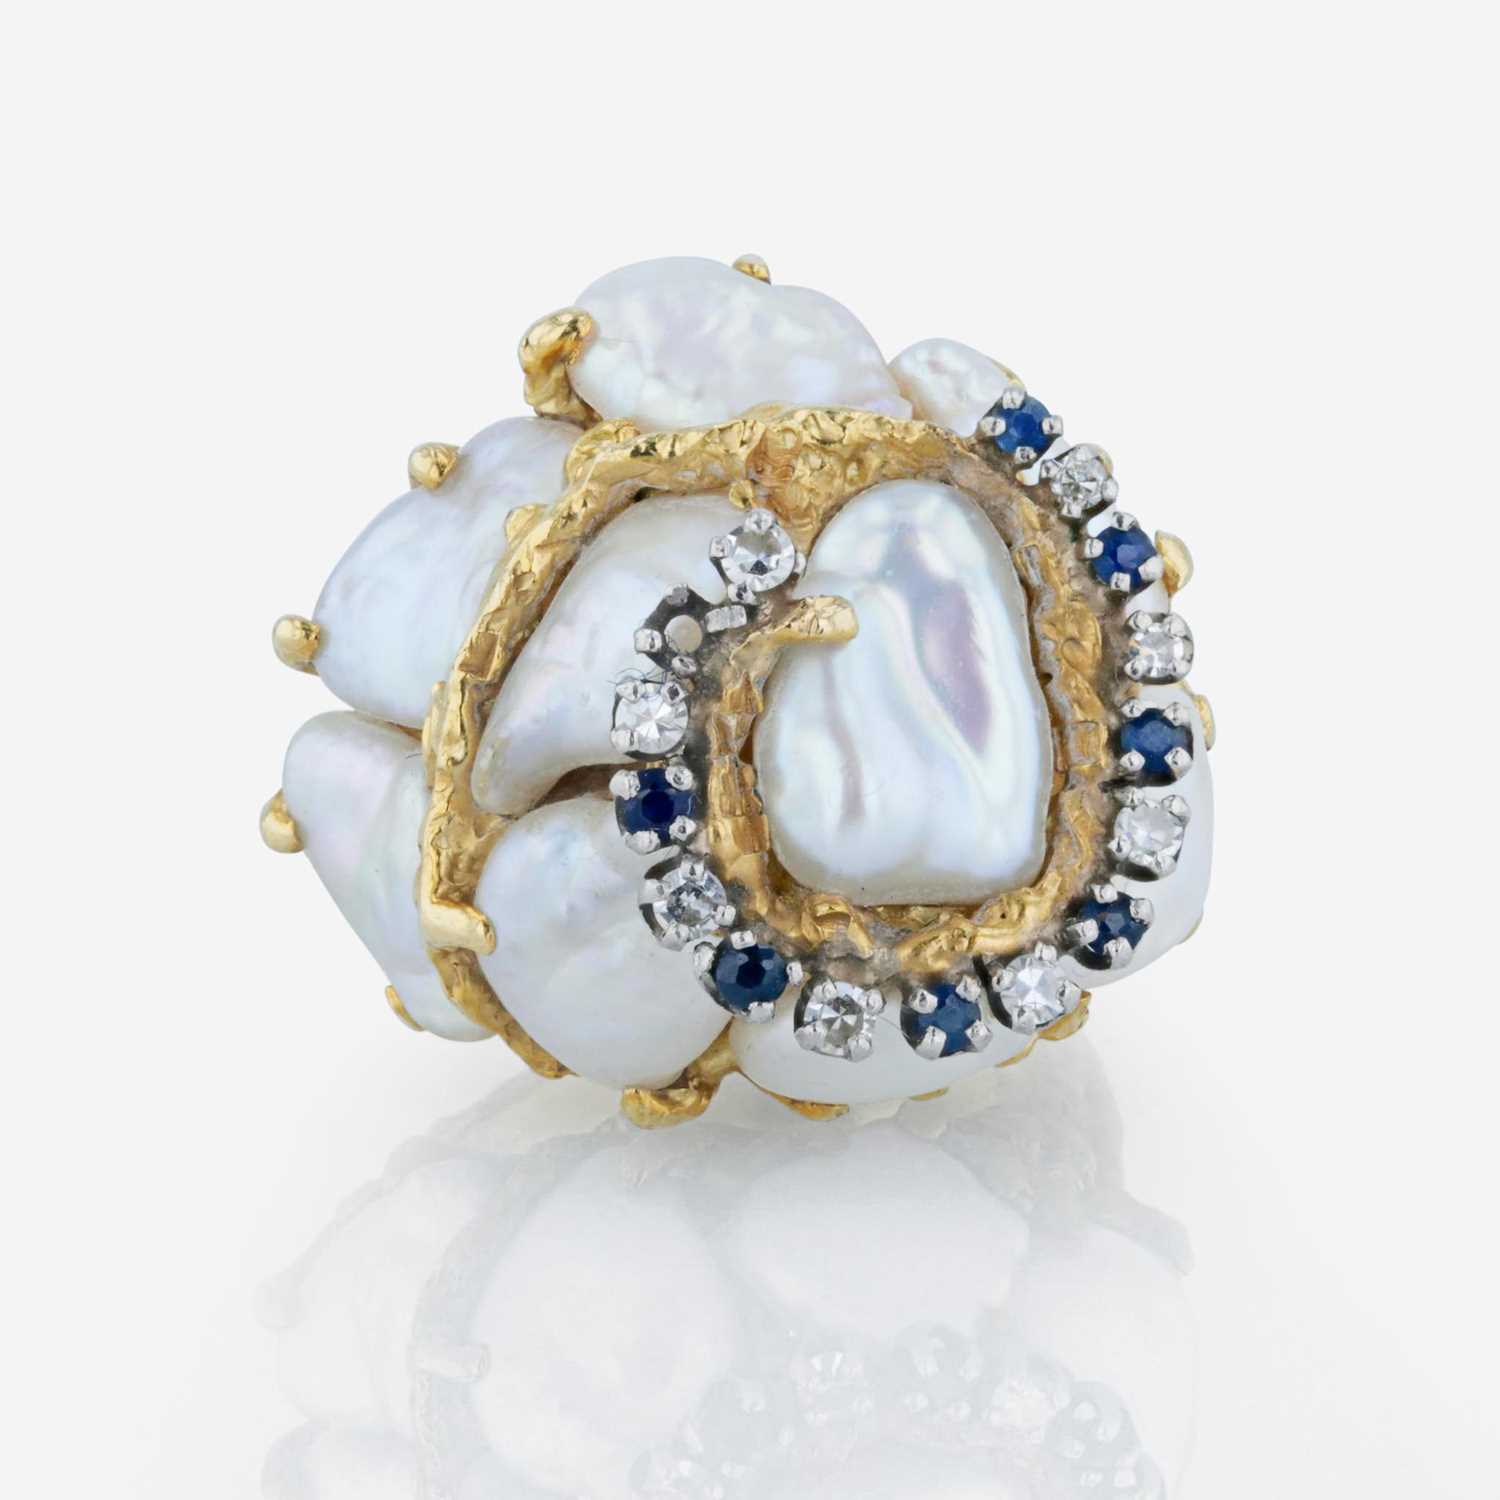 Lot 94 - An 18K yellow gold, baroque cultured pearl, diamond, and sapphire ring